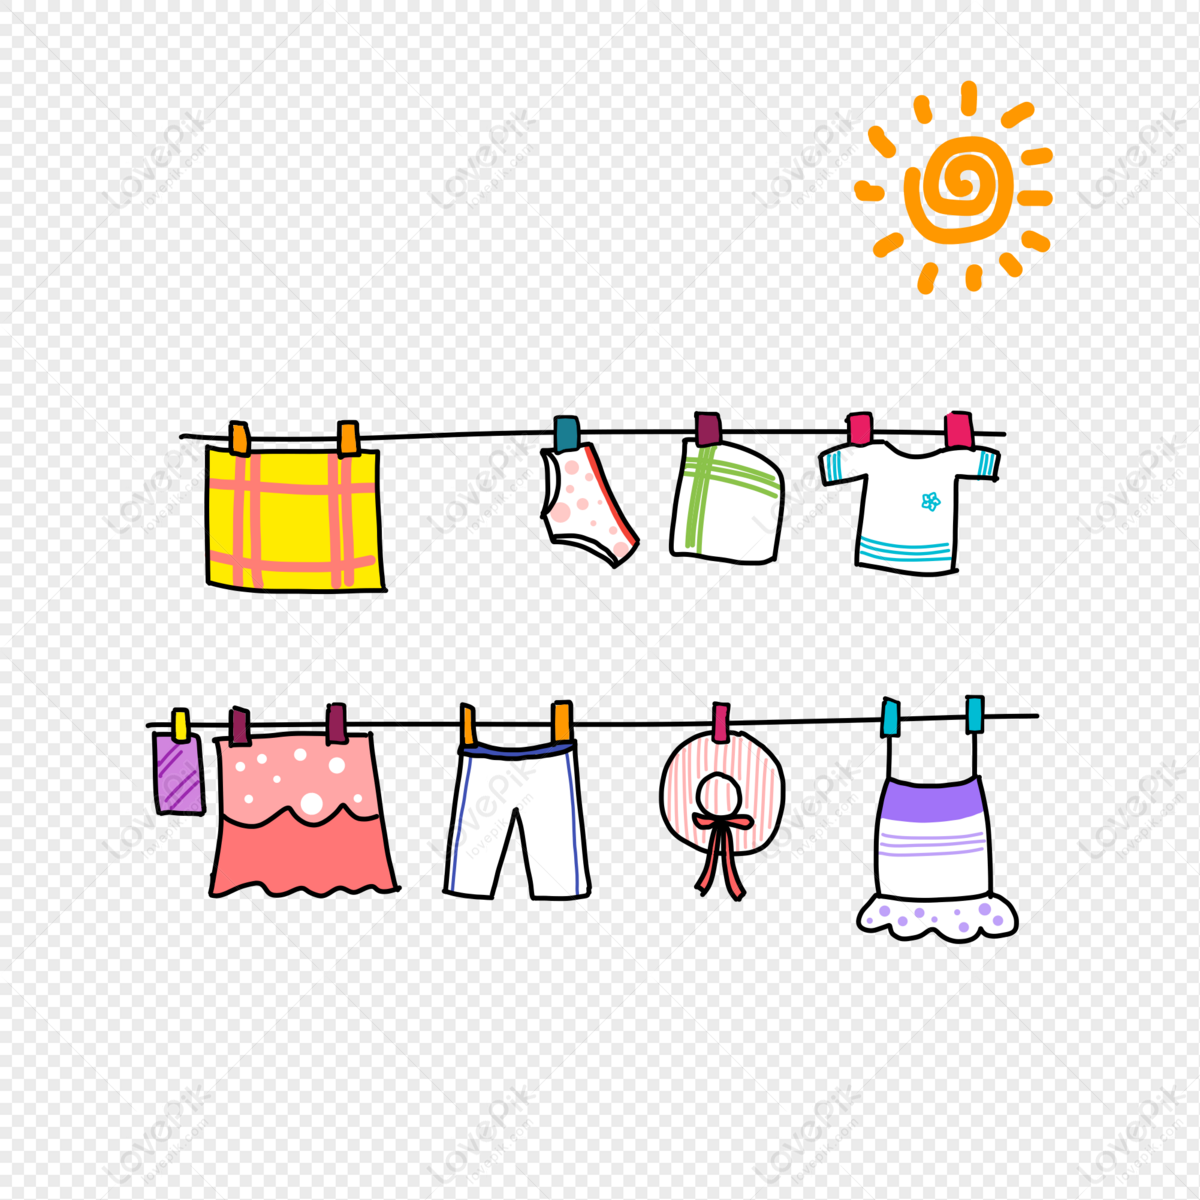 Clothesline PNG Hd Transparent Image And Clipart Image For Free Download -  Lovepik | 401544284